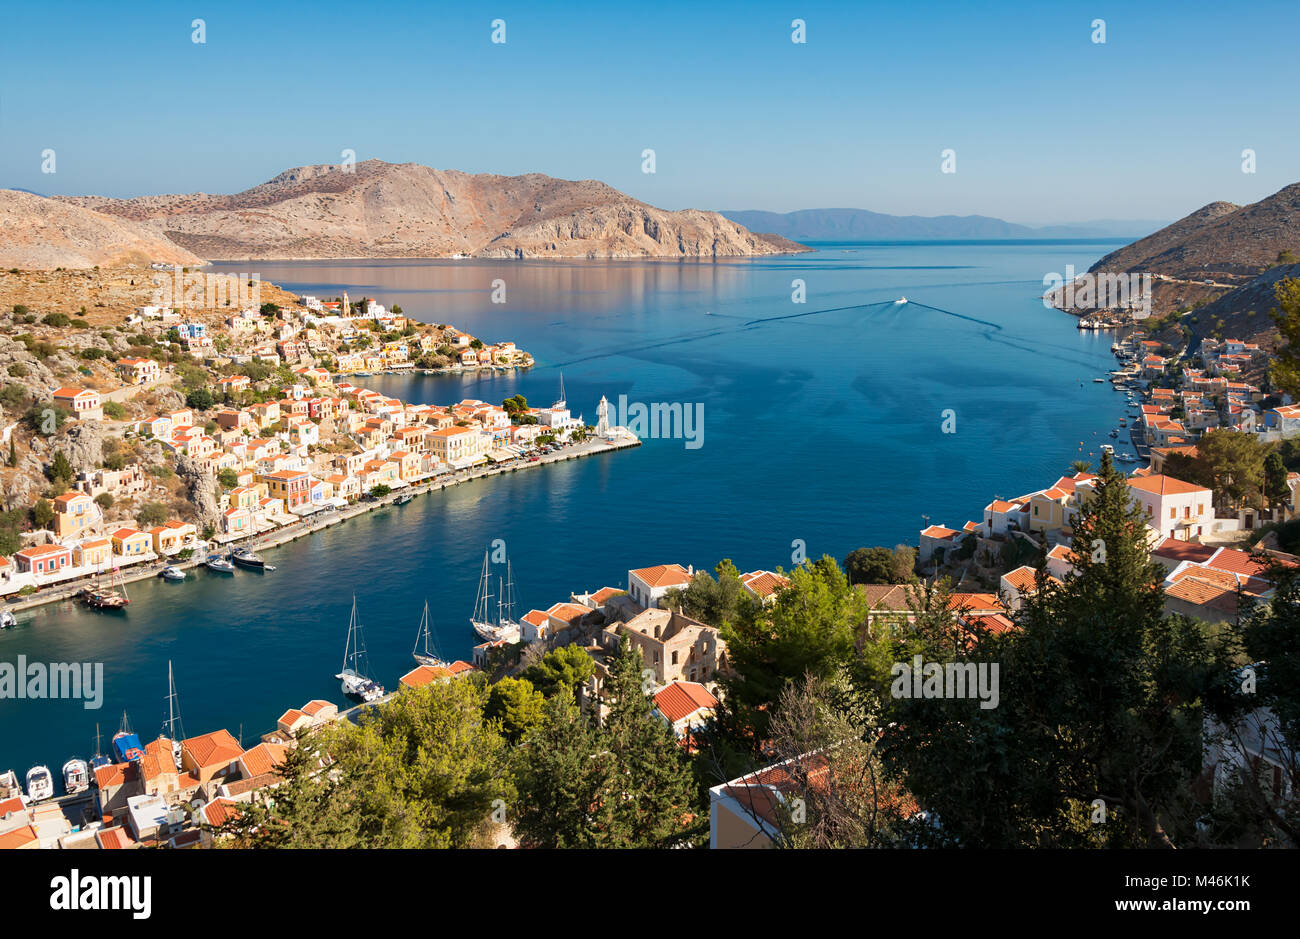 Panorama view of the village and port Gialos on the Greek island of Symi and the uninhabited islet Nimos, Dodecanese Greece, and Turkey in background Stock Photo